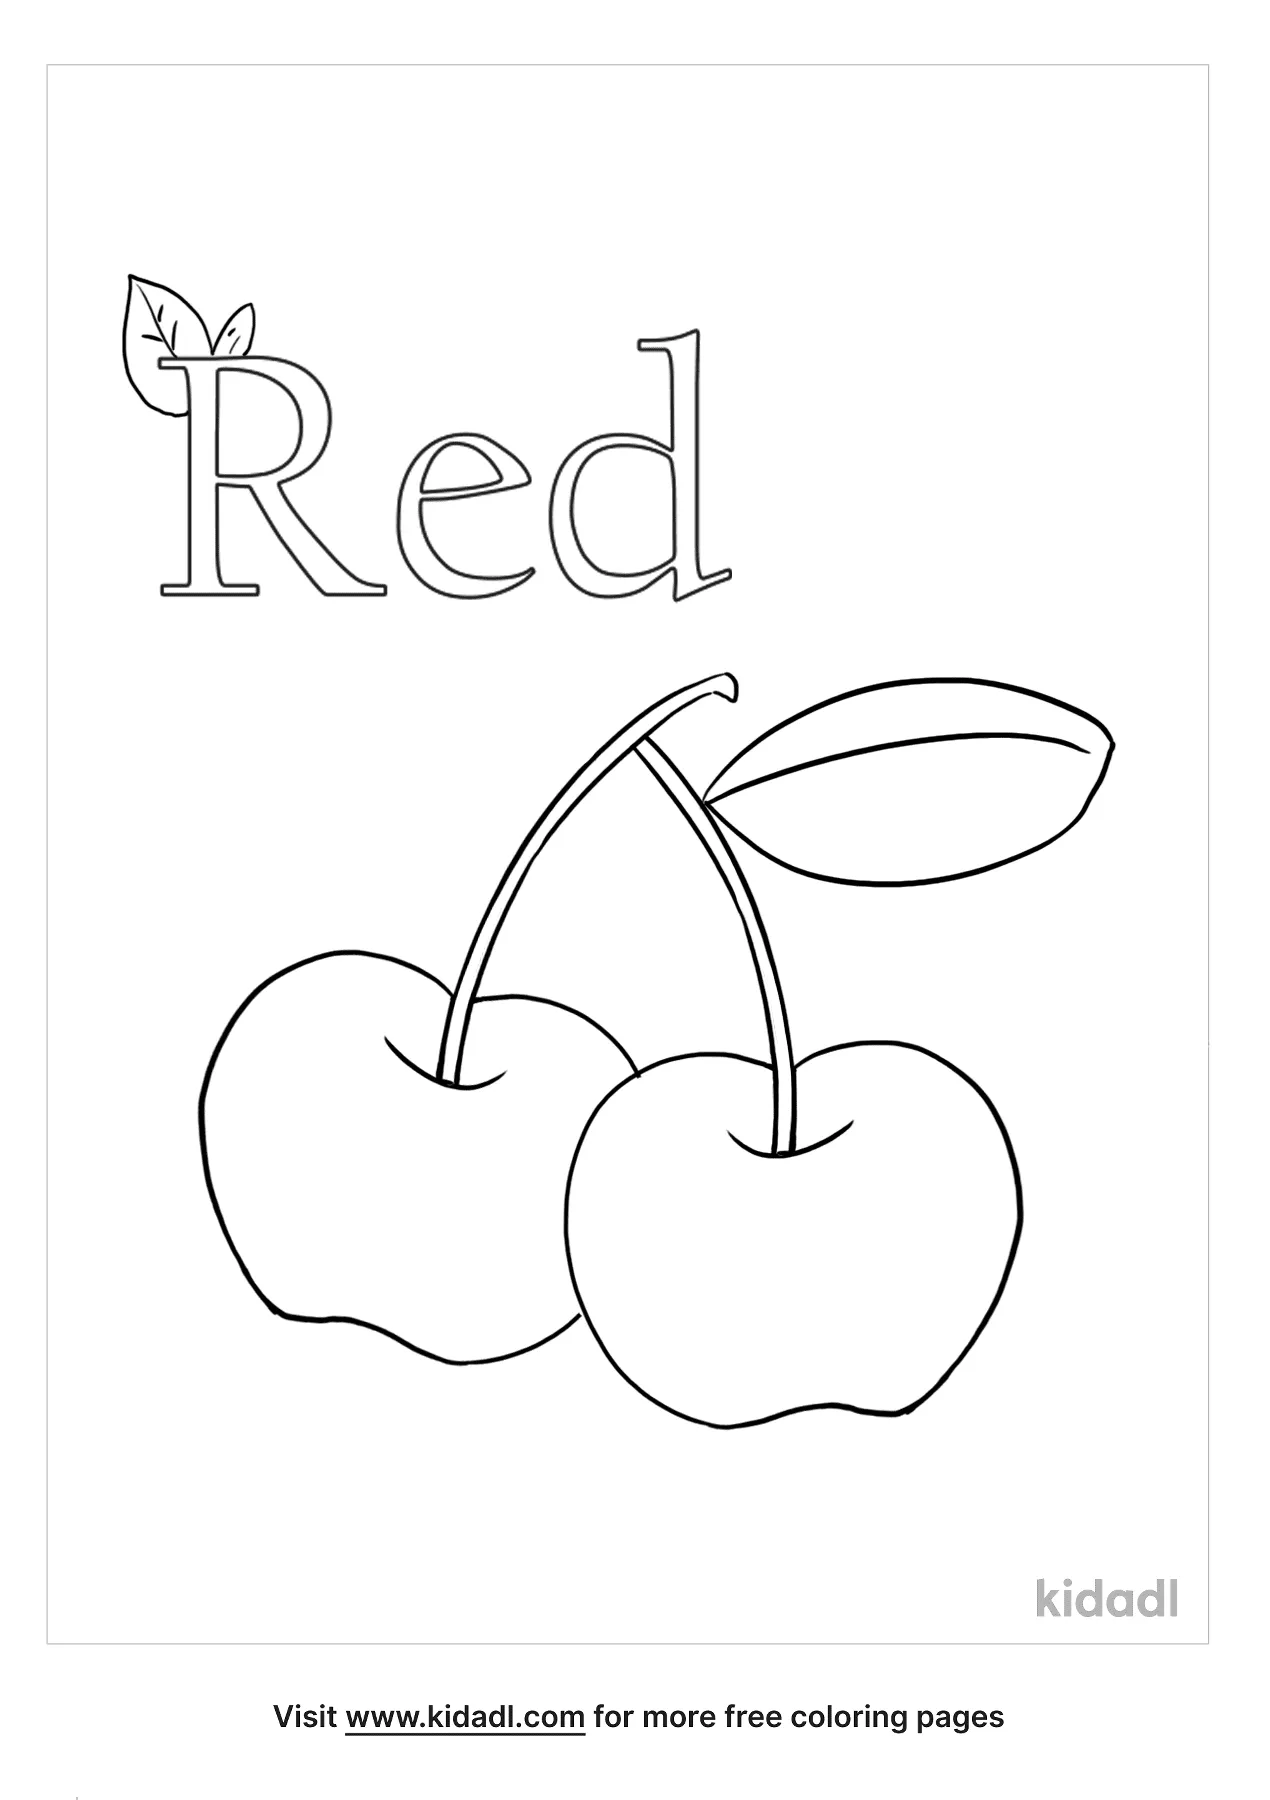 free-color-red-coloring-page-coloring-page-printables-kidadl